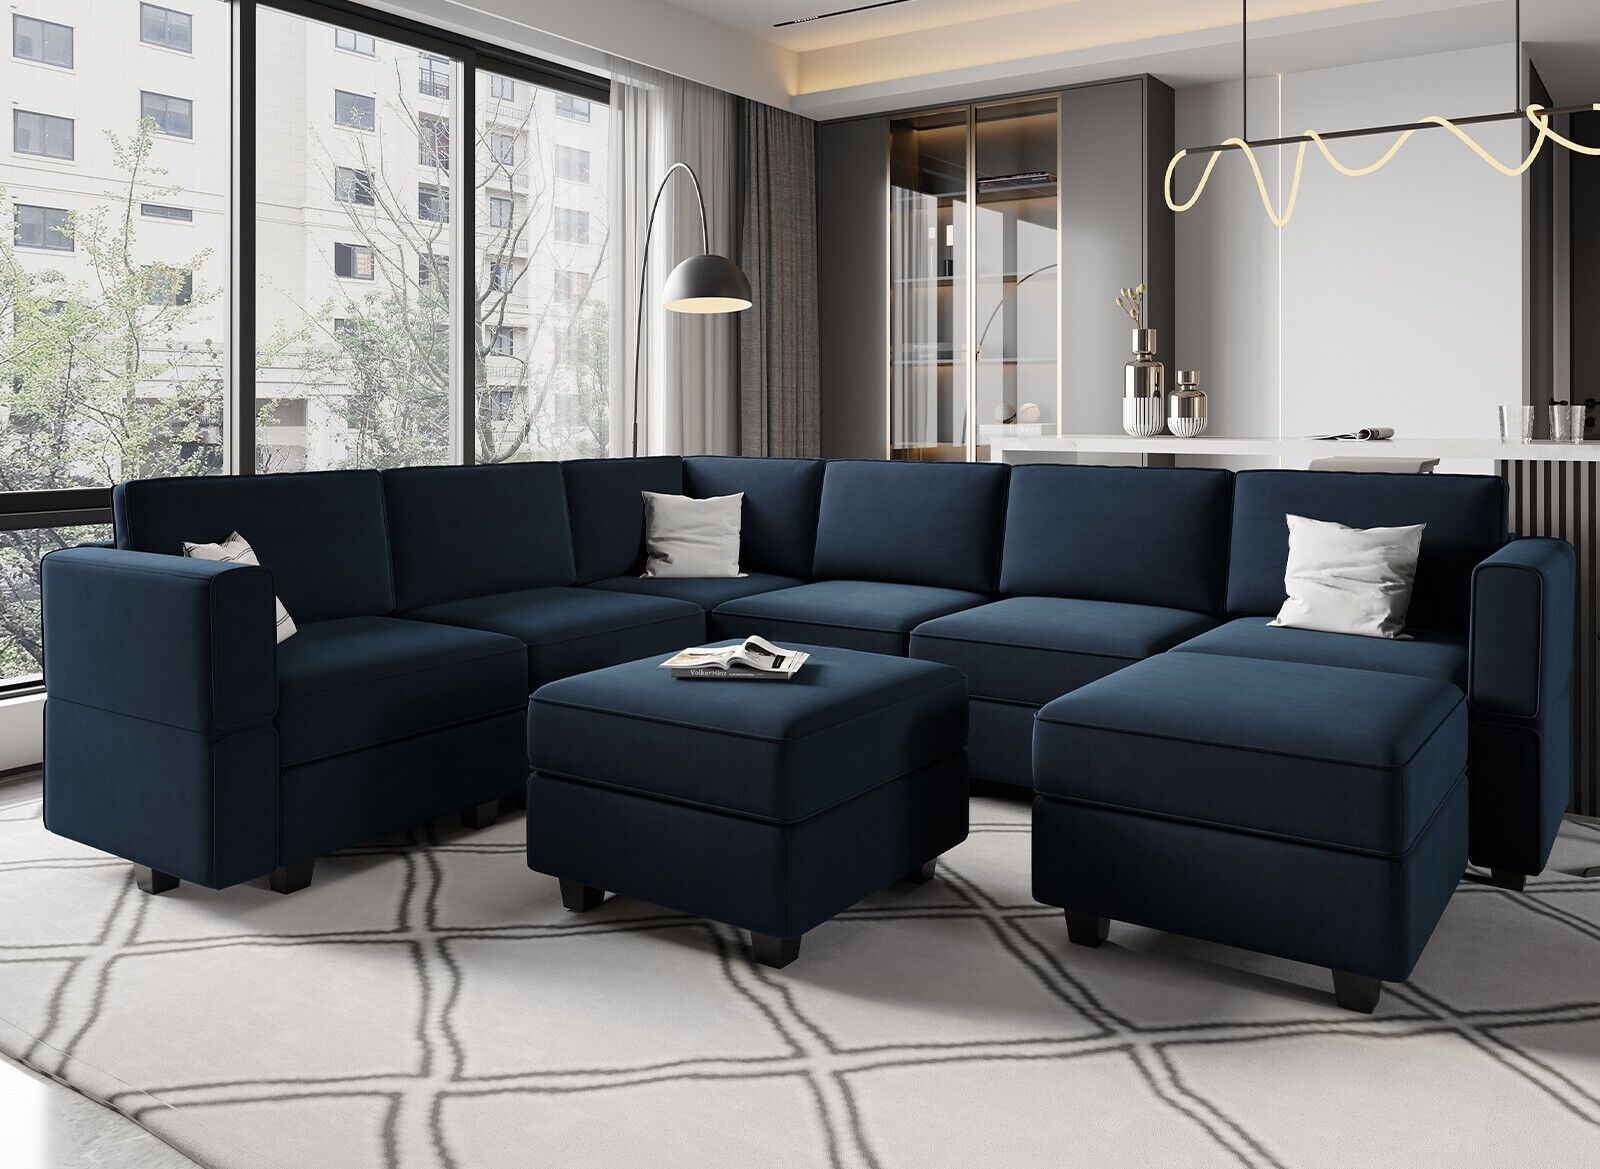 Belffin Modular Sectional Sofa With Storage Oversized U Shaped Couch Velvet  Blue | Being Patient Within U Shaped Modular Sectional Sofas (View 14 of 15)